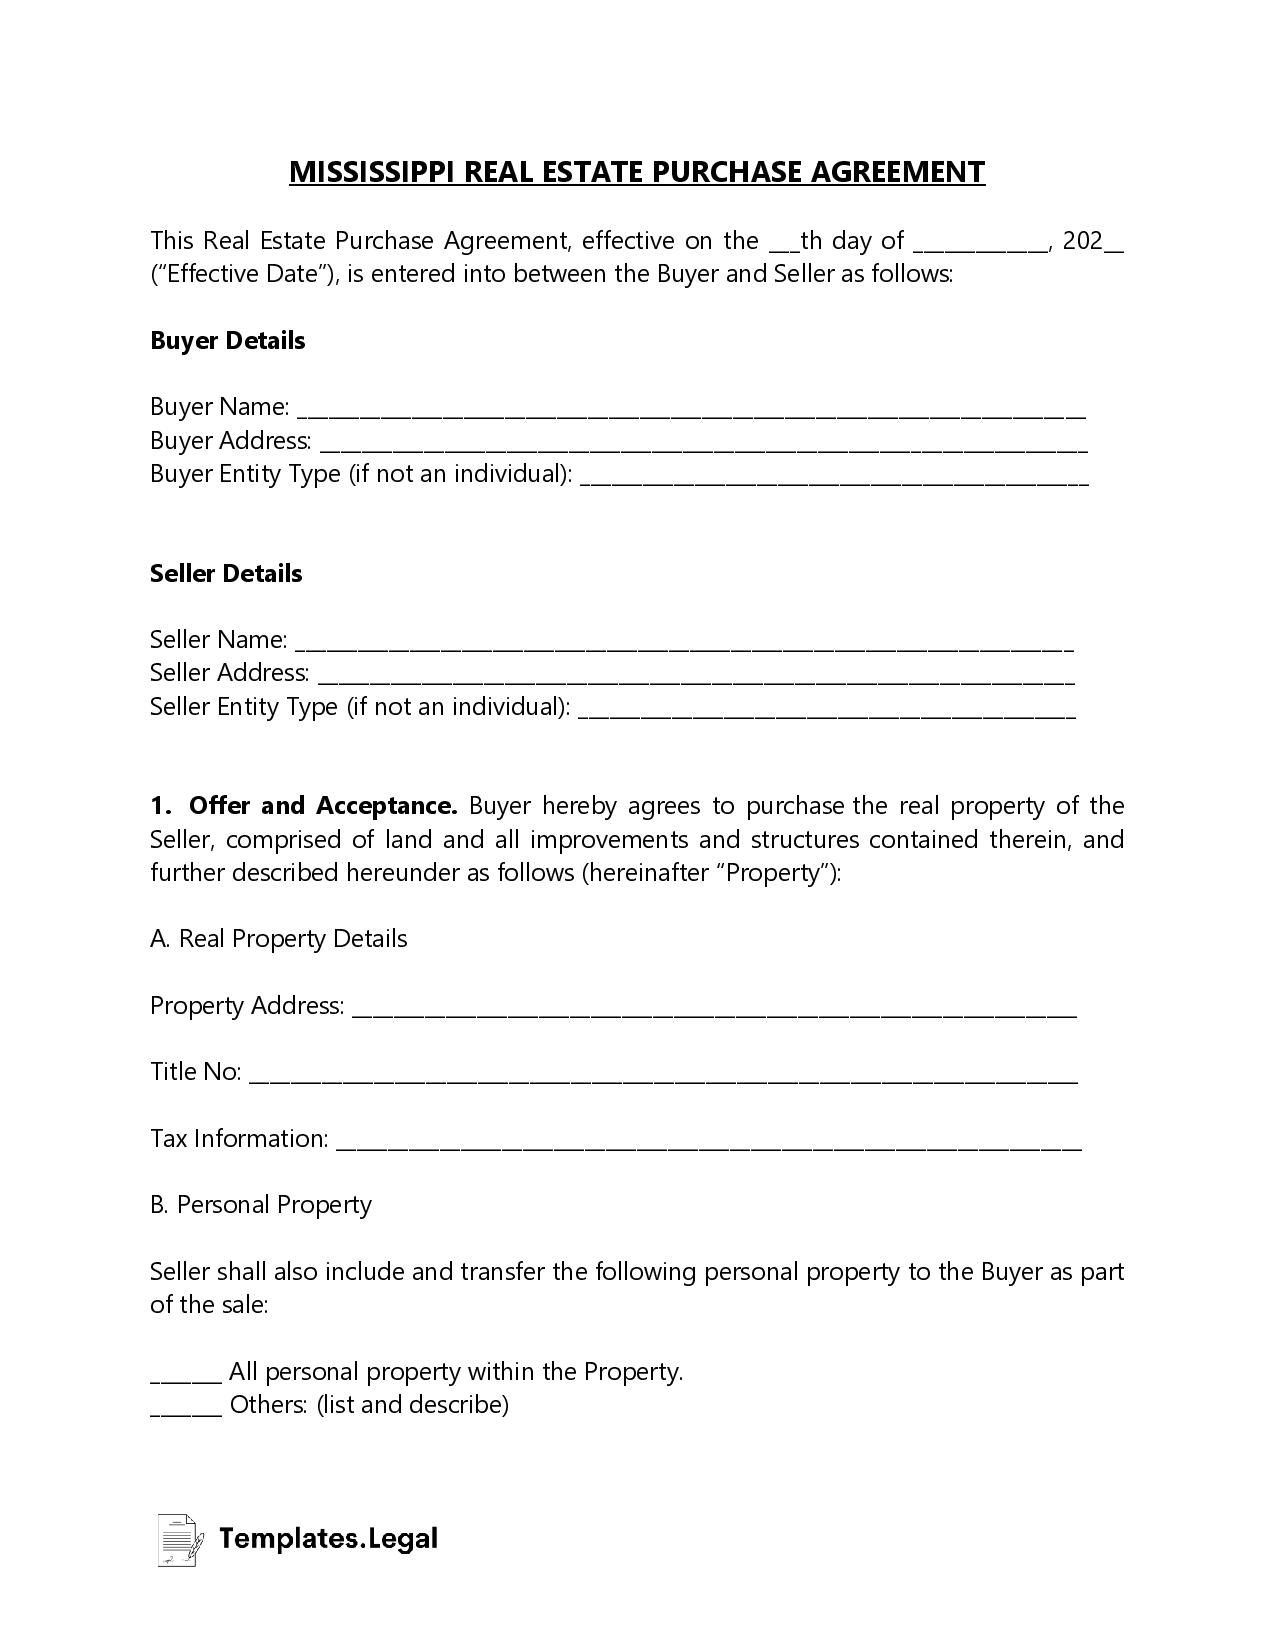 Mississippi Real Estate Purchase Agreement - Templates.Legal